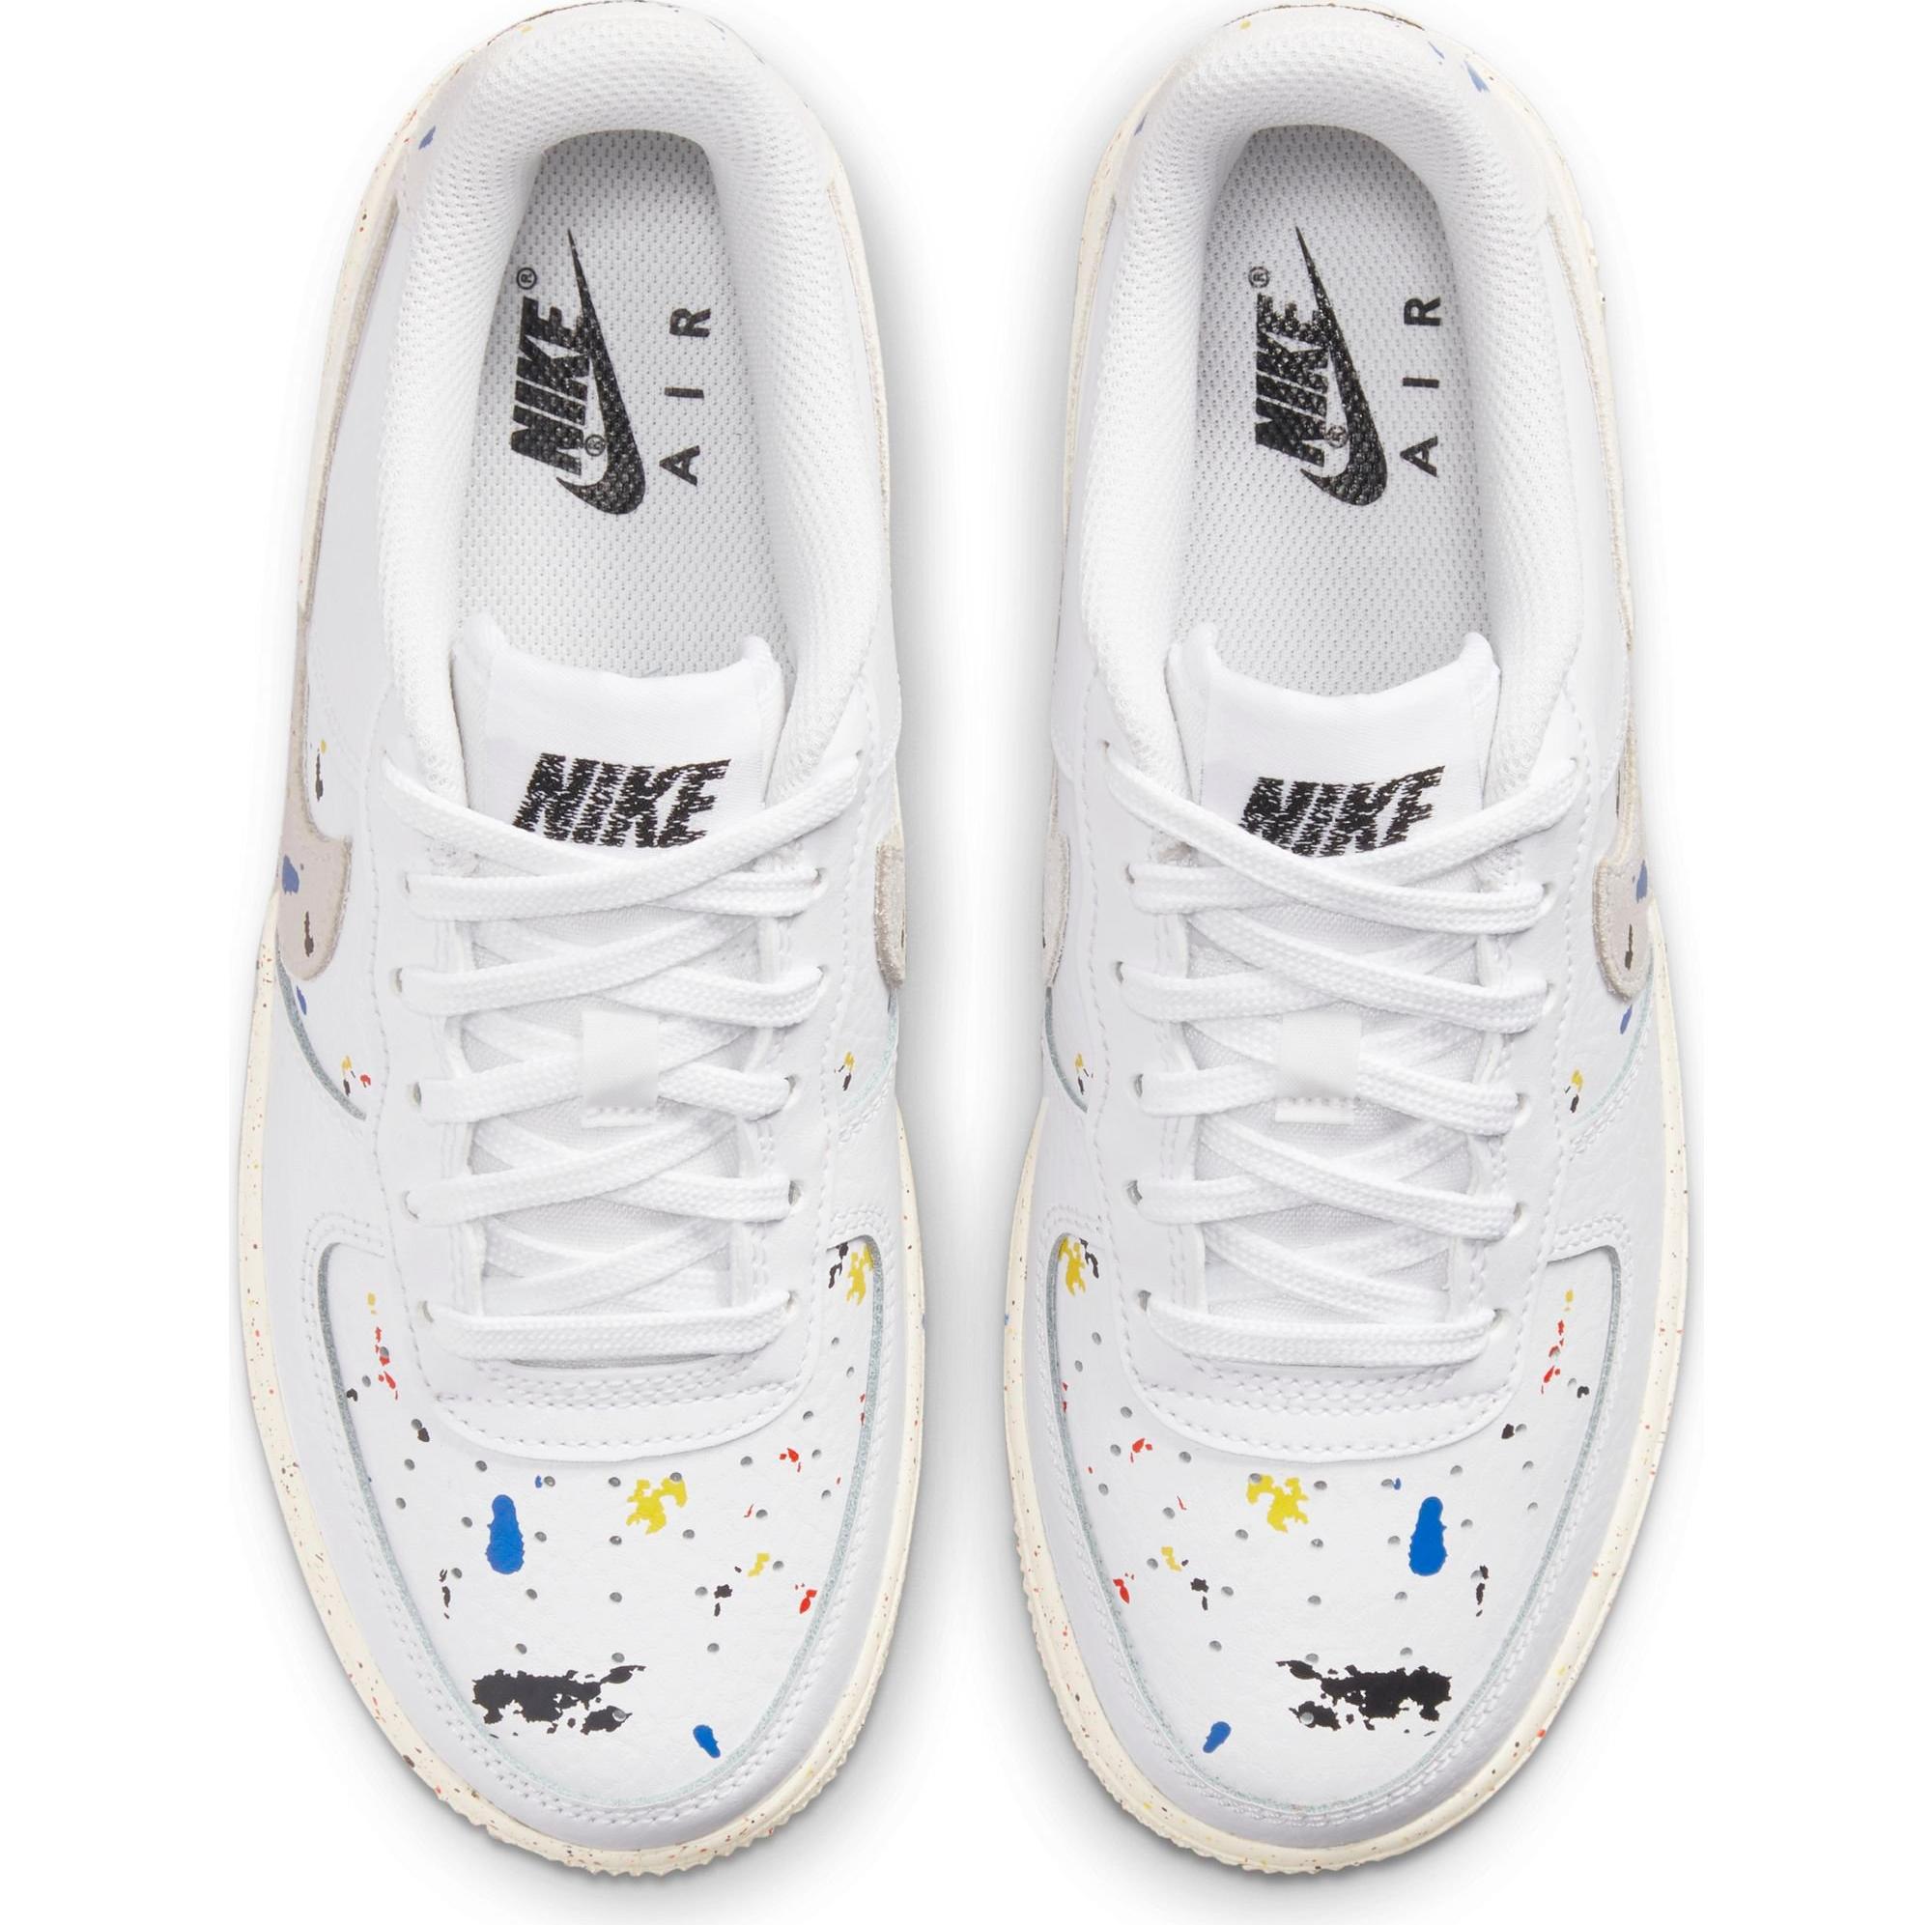  NC Children's White Shoes Spring New Leather Boys Sneakers air  Force one Casual Girls Sneakers Breathable 34码内长21.5cm 小银钩白色 : Clothing,  Shoes & Jewelry